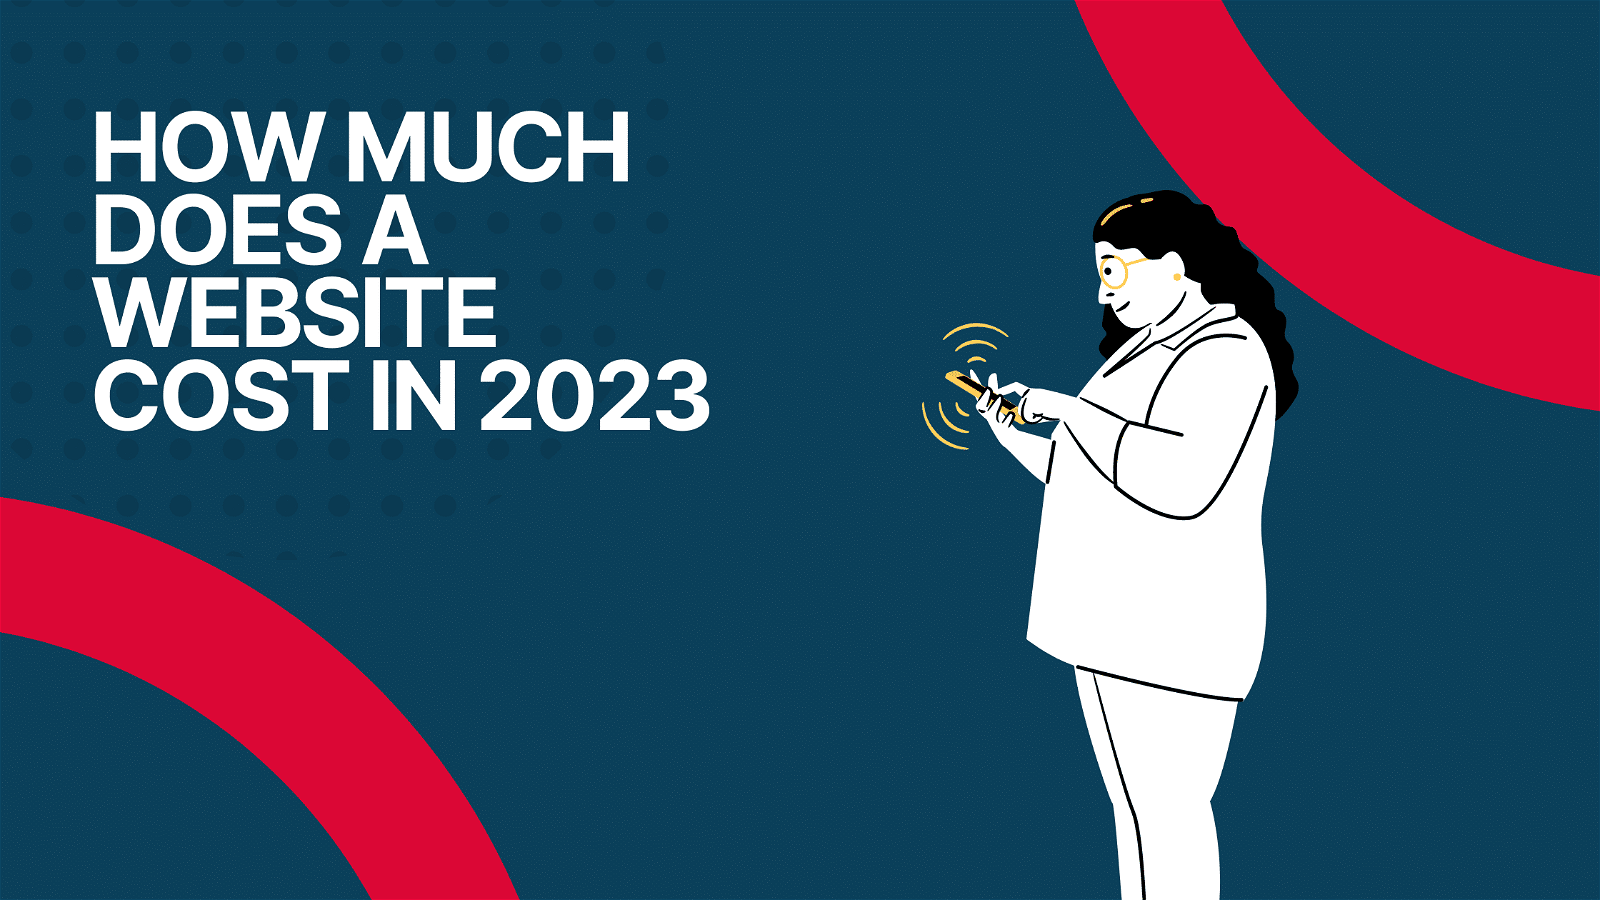 In this image, someone is asking how much a website will cost in the year 2023.